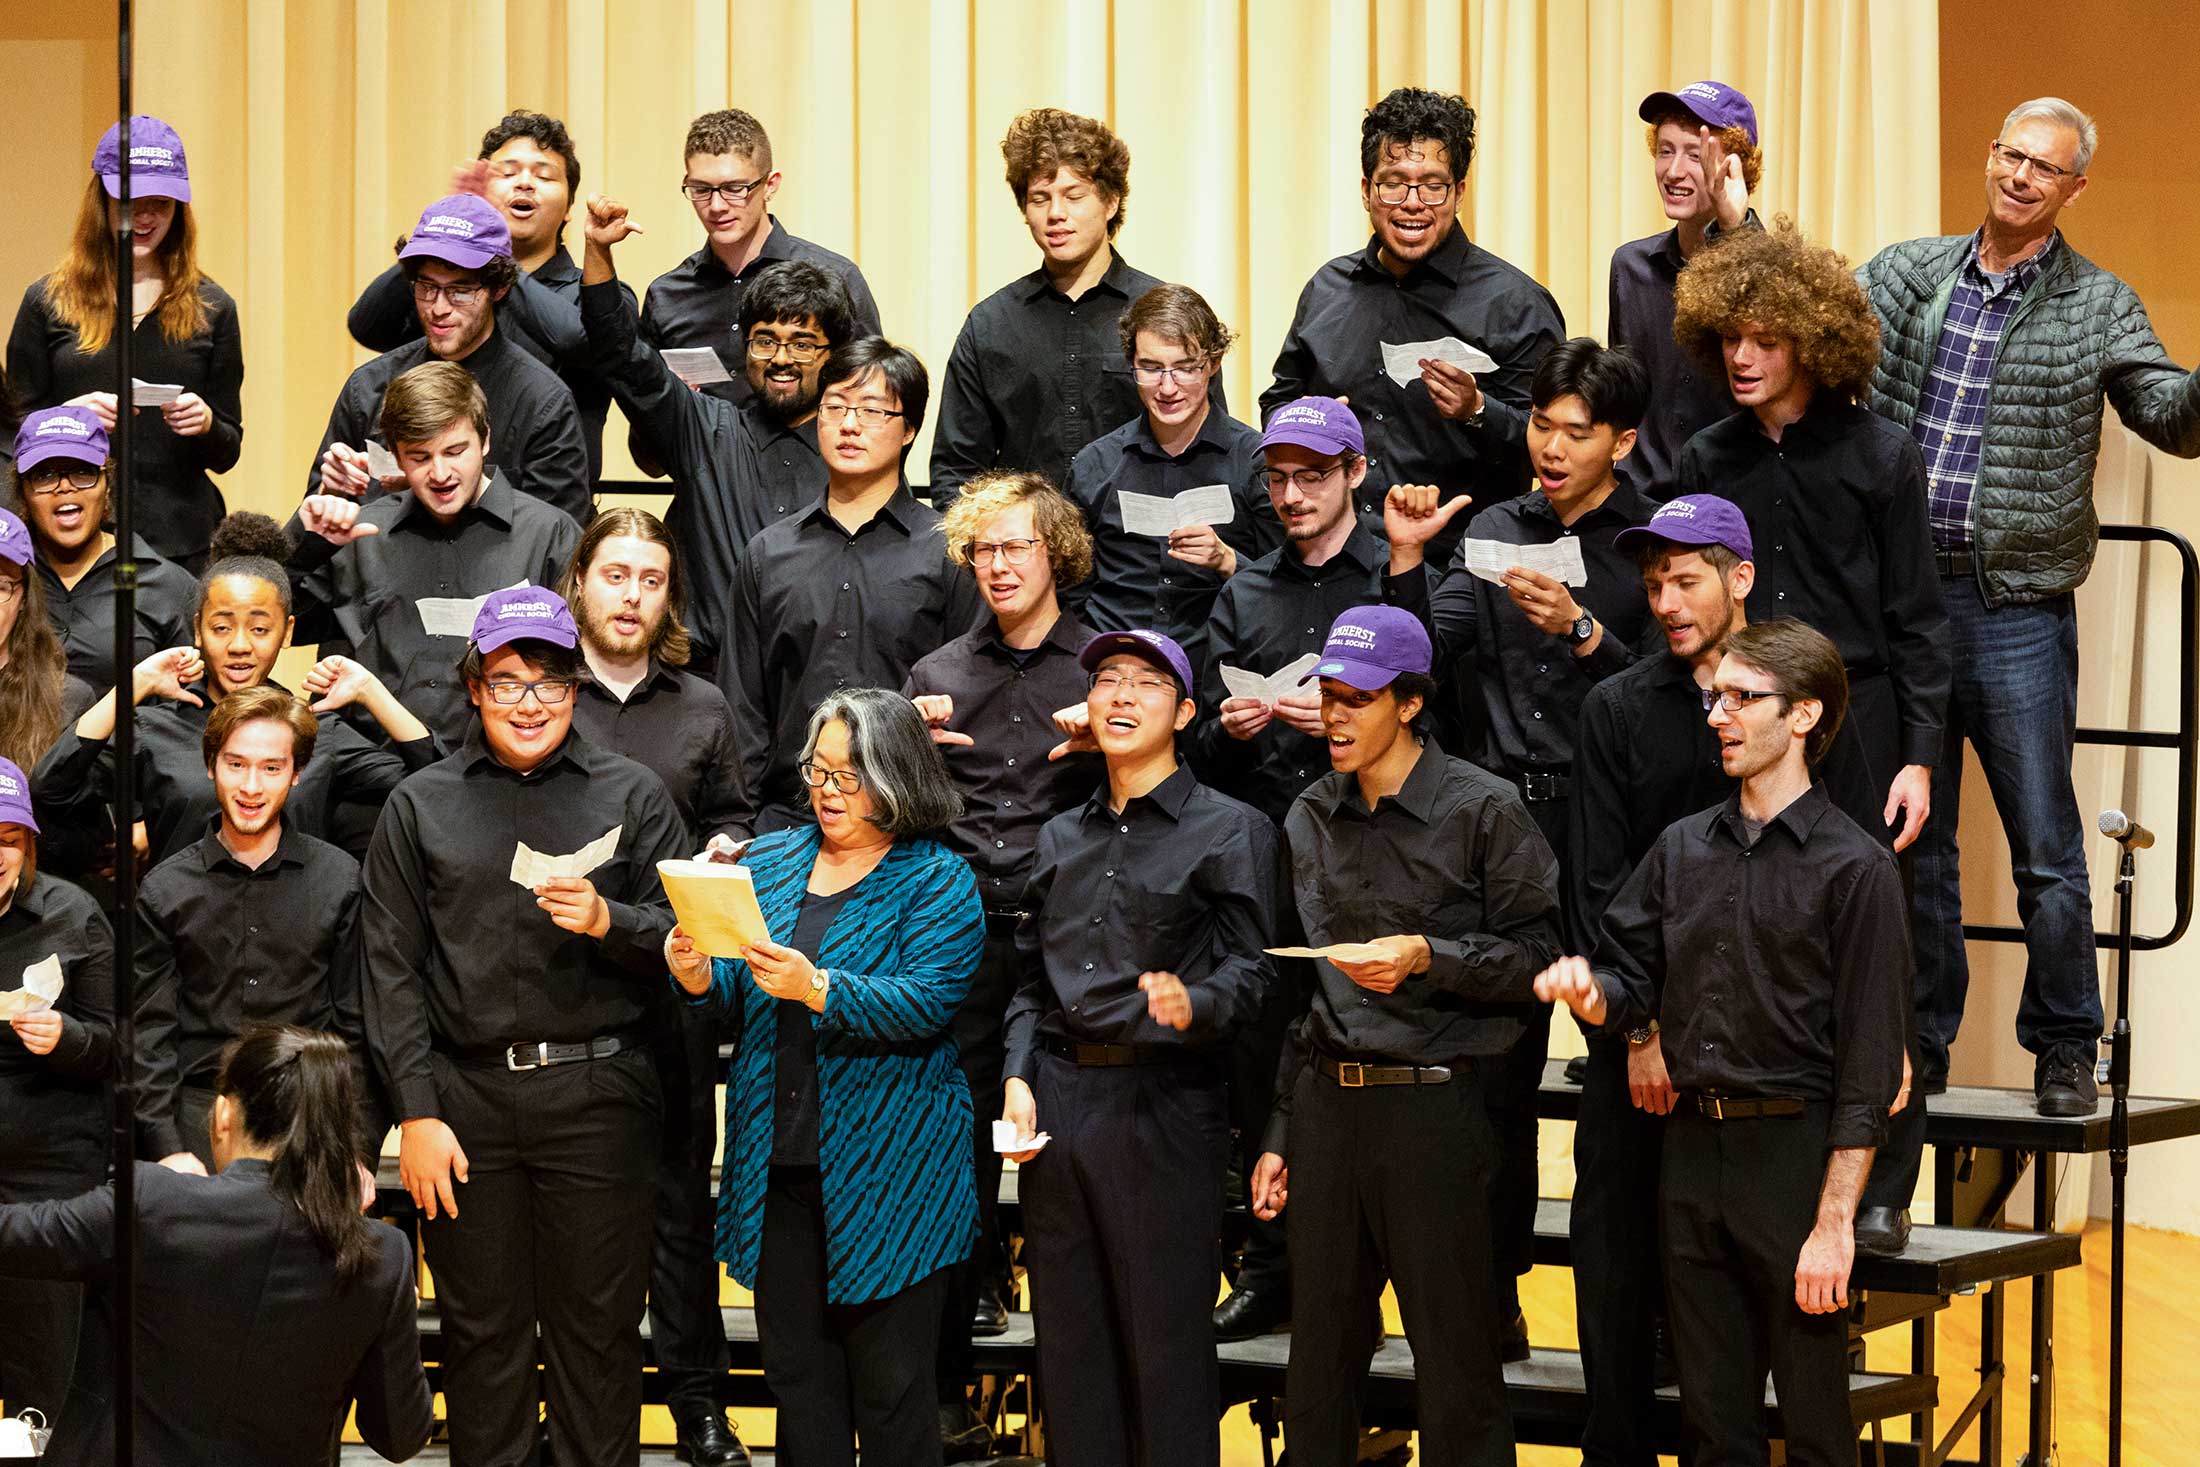 The Amherst College Choral Society, plus a few parents, performing during Family Weekend